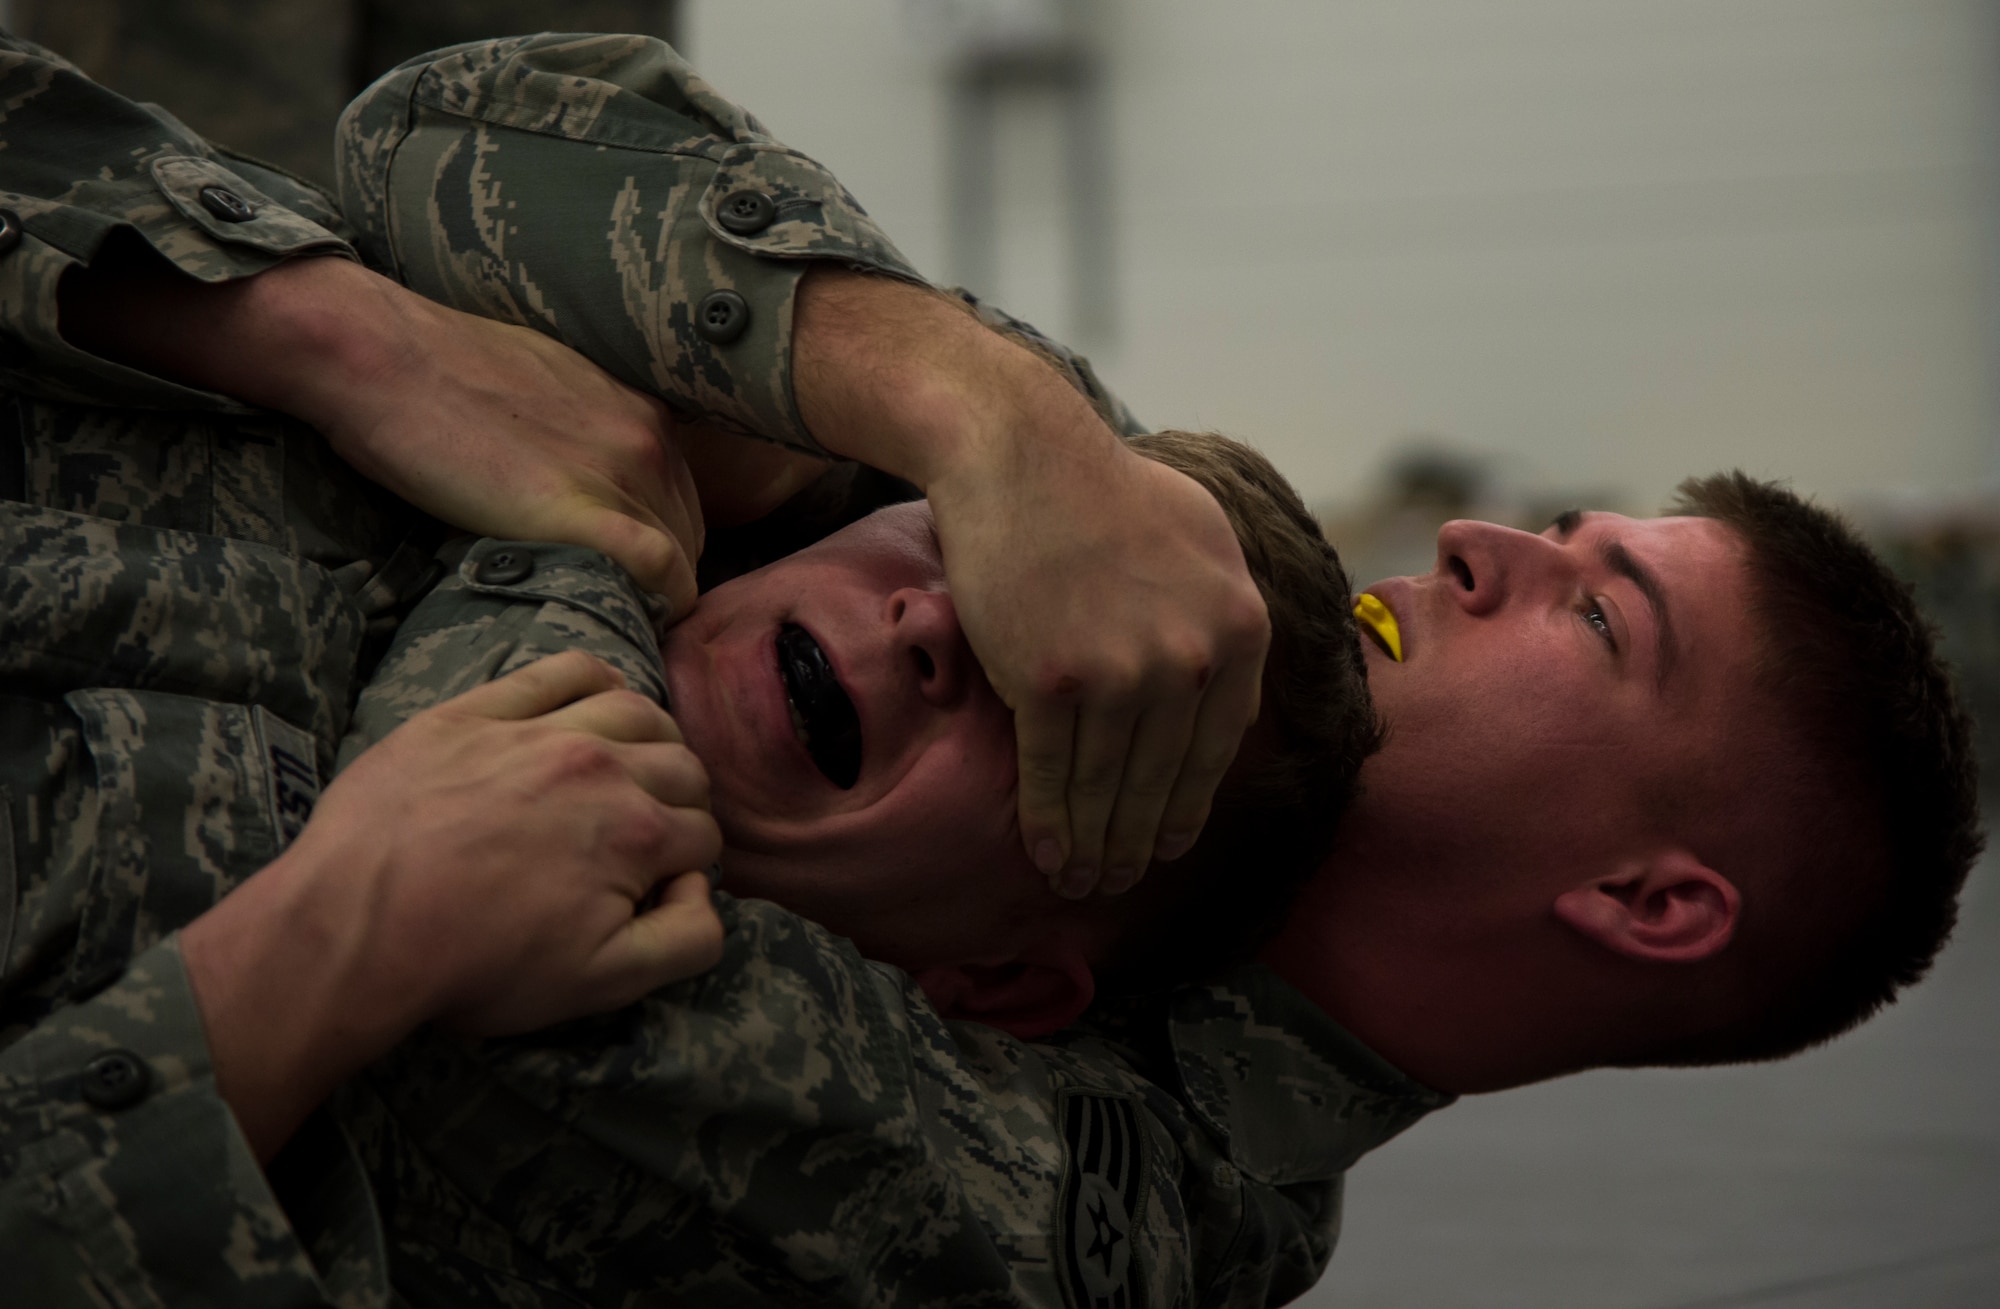 Staff Sgt. Mark Kegel, 435th Security Forces Squadron patrolman, spars with Staff Sgt. Jacob Udell, 65th SFS flight chief from Lajes Field, Portugal, during a Security Forces combative course Jan. 14, 2016, at Ramstein Air Base, Germany. Though the course is held at Ramstein, geographically separated units can send a member to be trained as an instructor and spread that knowledge upon their return to their home station. (U.S. Air Force photo/Senior Airman Jonathan Stefanko)